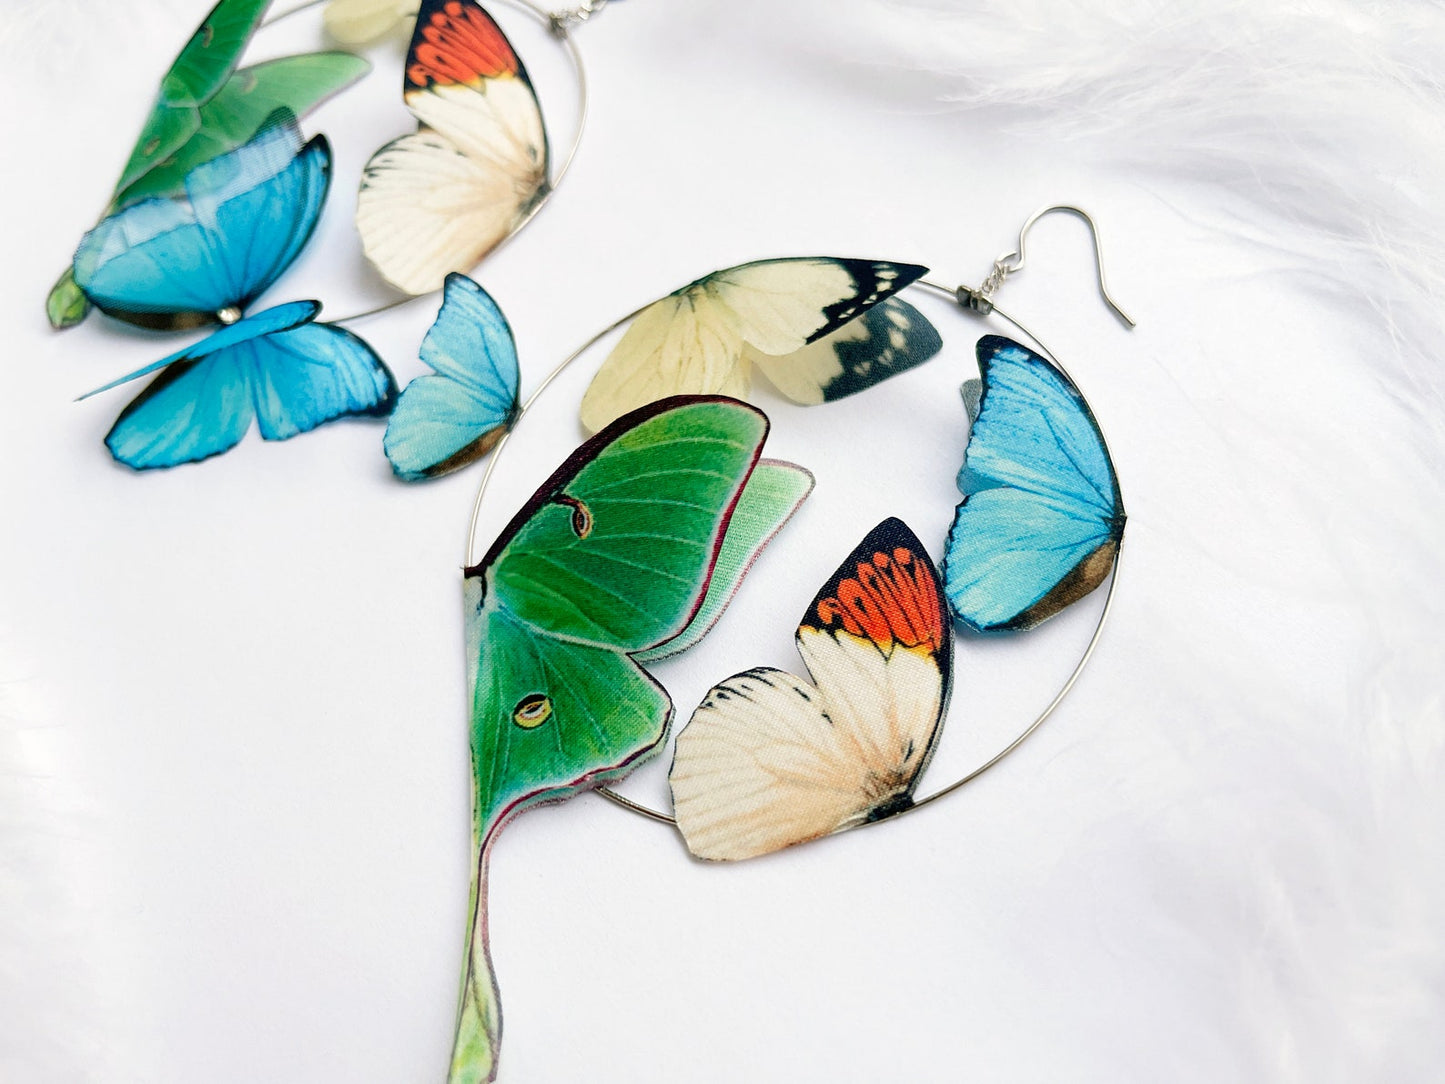 Custom floral design hoop earrings with butterfly and Luna moth charms